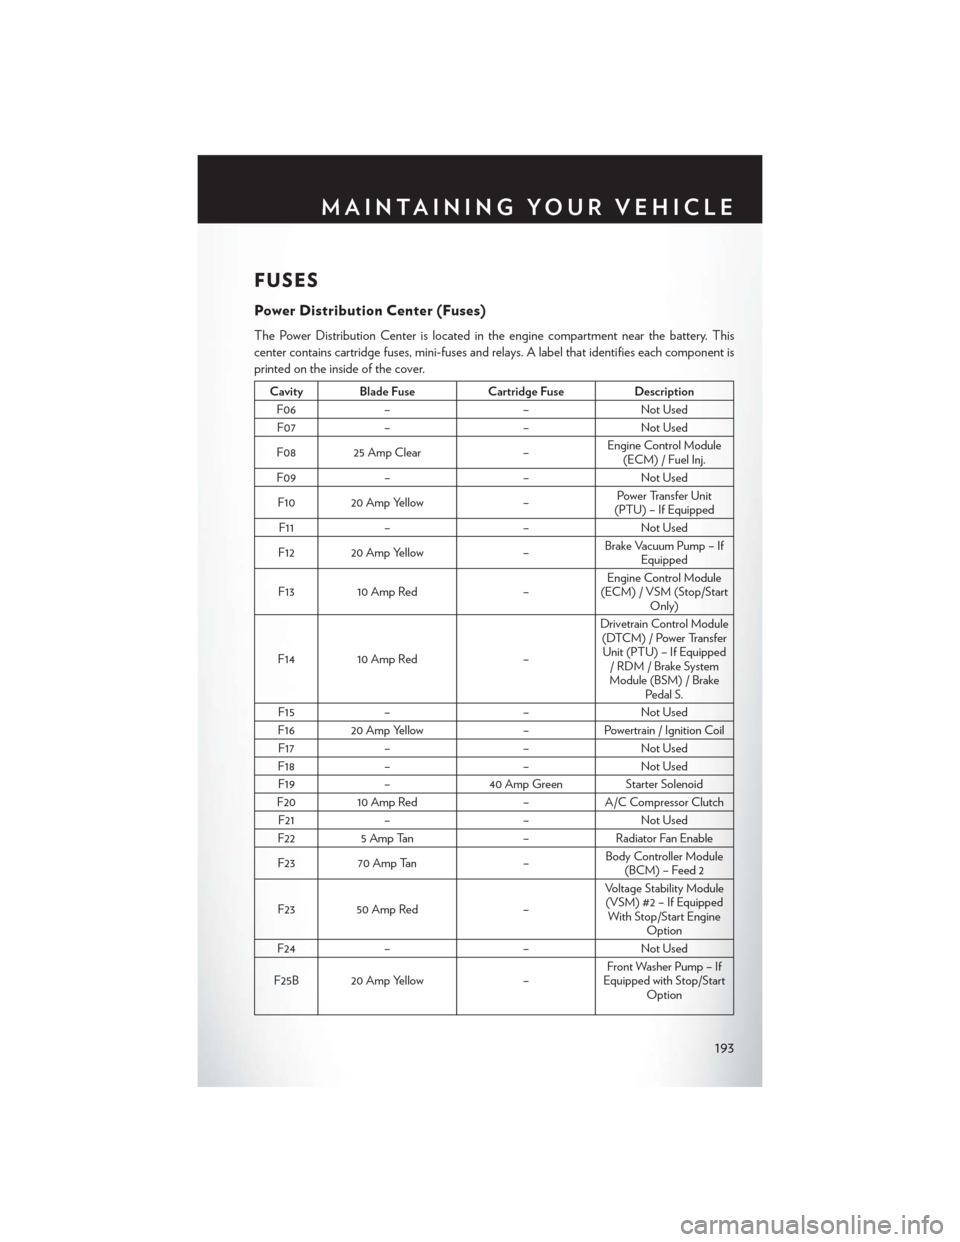 CHRYSLER 200 2015 2.G Owners Guide FUSES
Power Distribution Center (Fuses)
The Power Distribution Center is located in the engine compartment near the battery. This
center contains cartridge fuses, mini-fuses and relays. A label that i